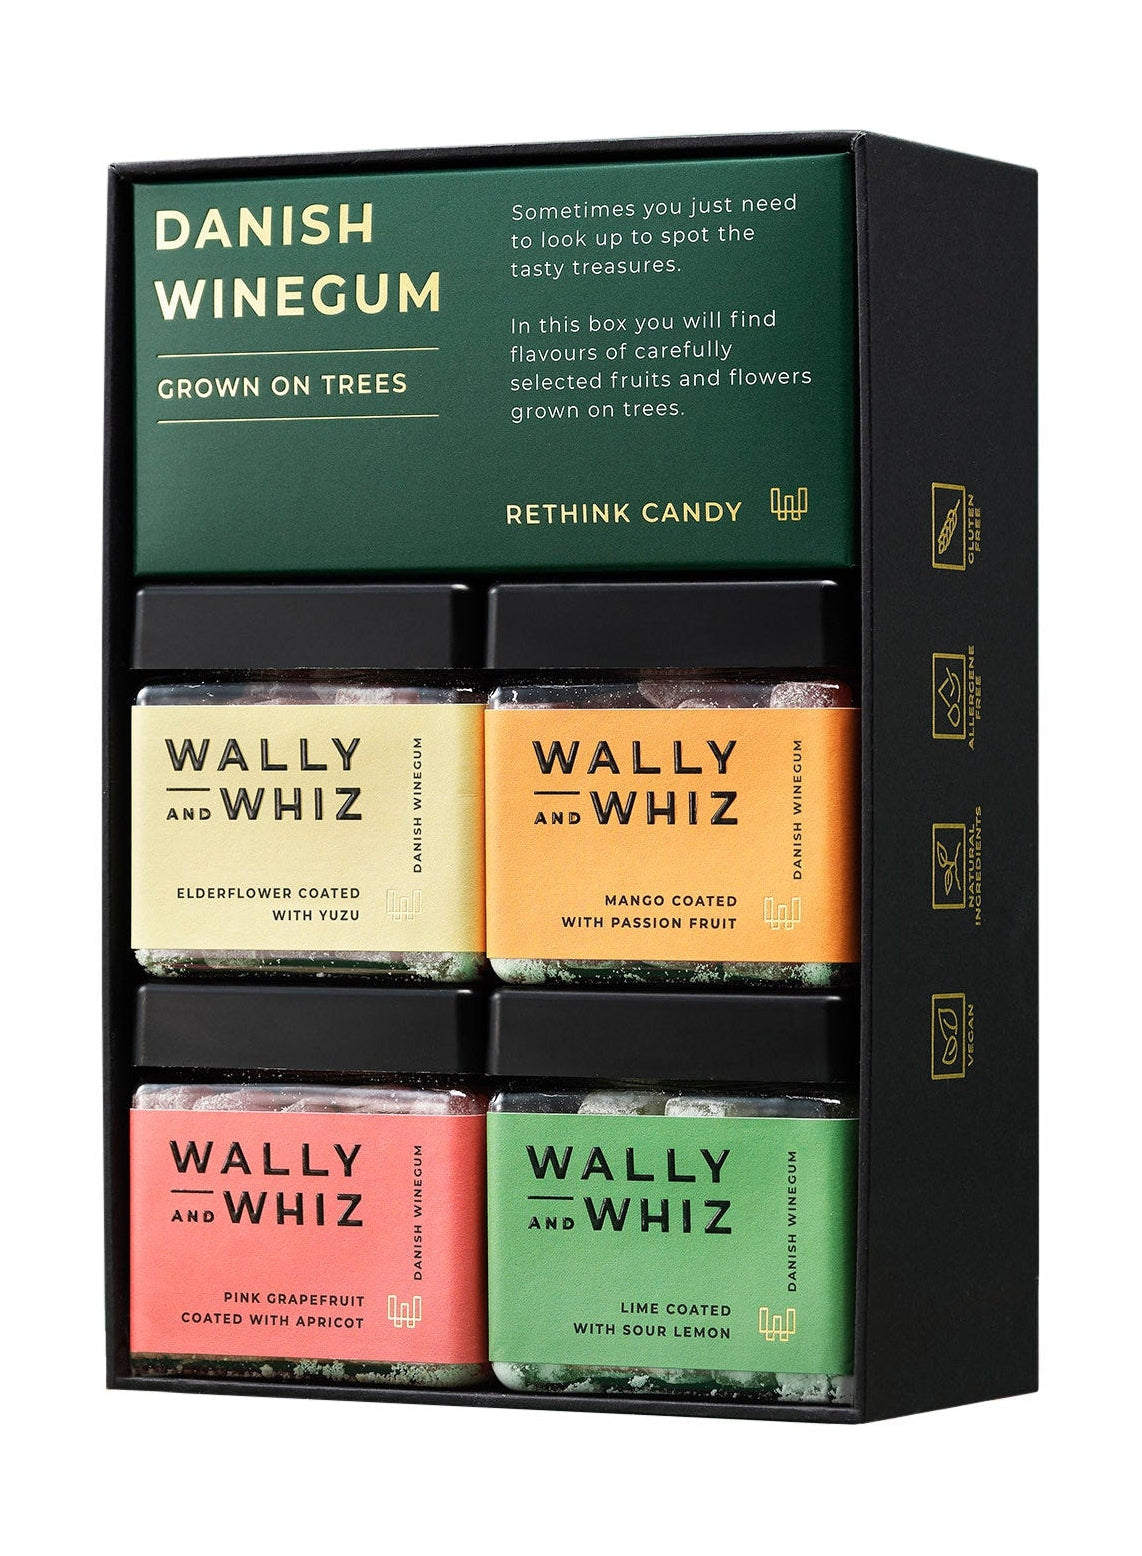 Wally And Whiz Grown On Trees Box, 560g